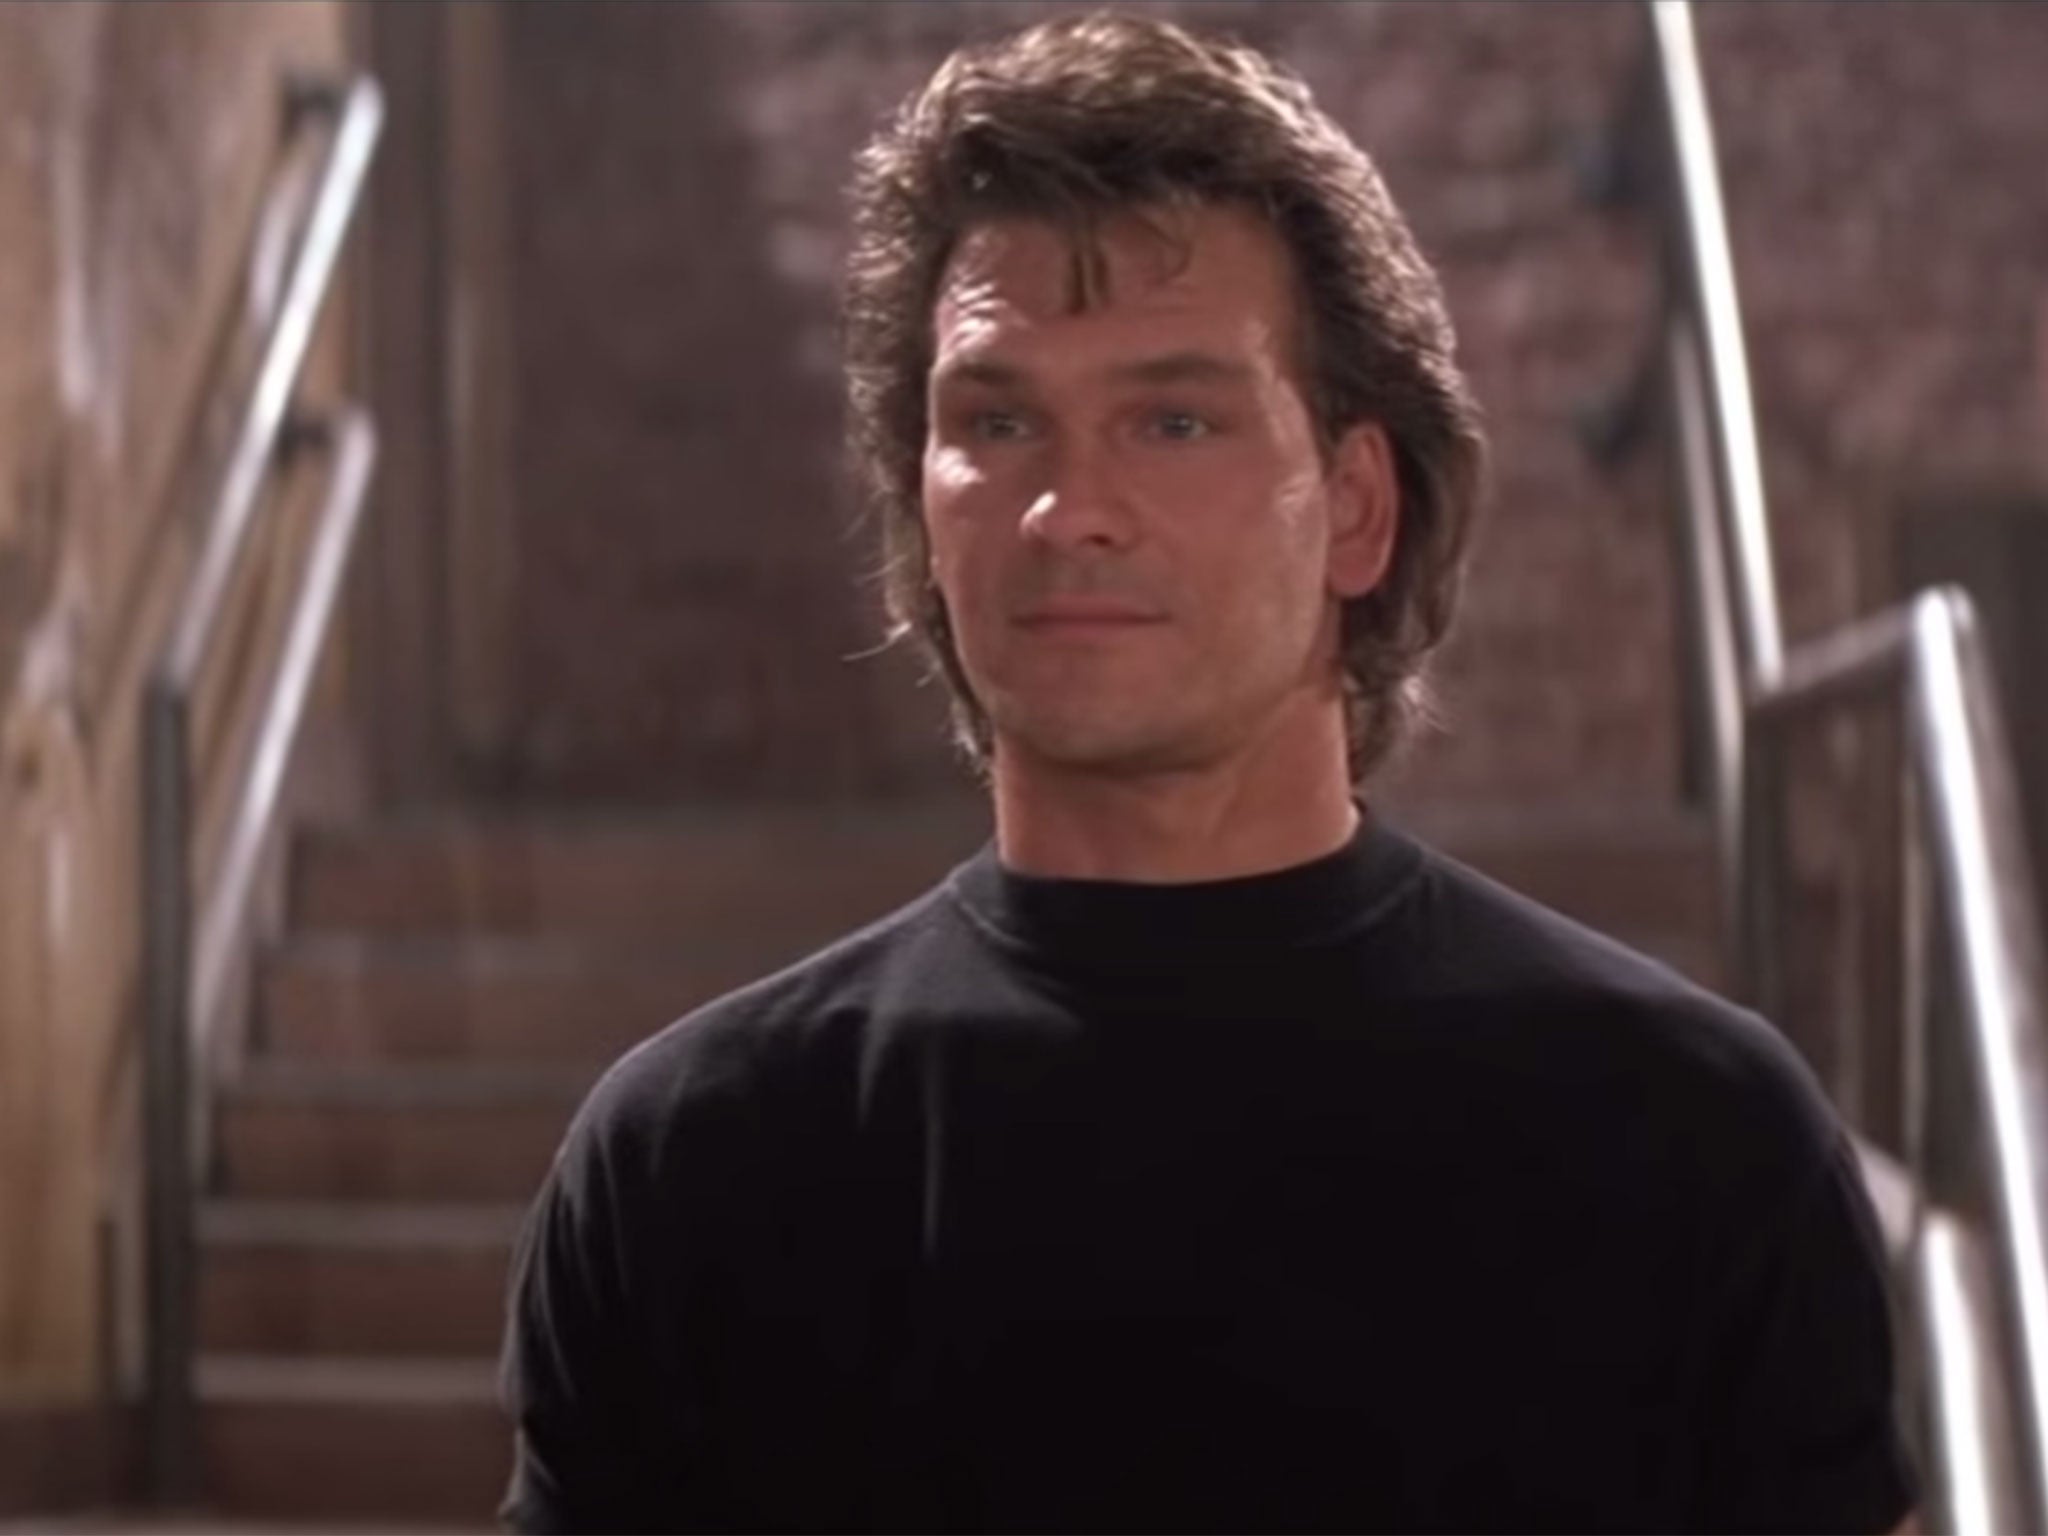 NYPD using Patrick Swayze movie Road House to train police